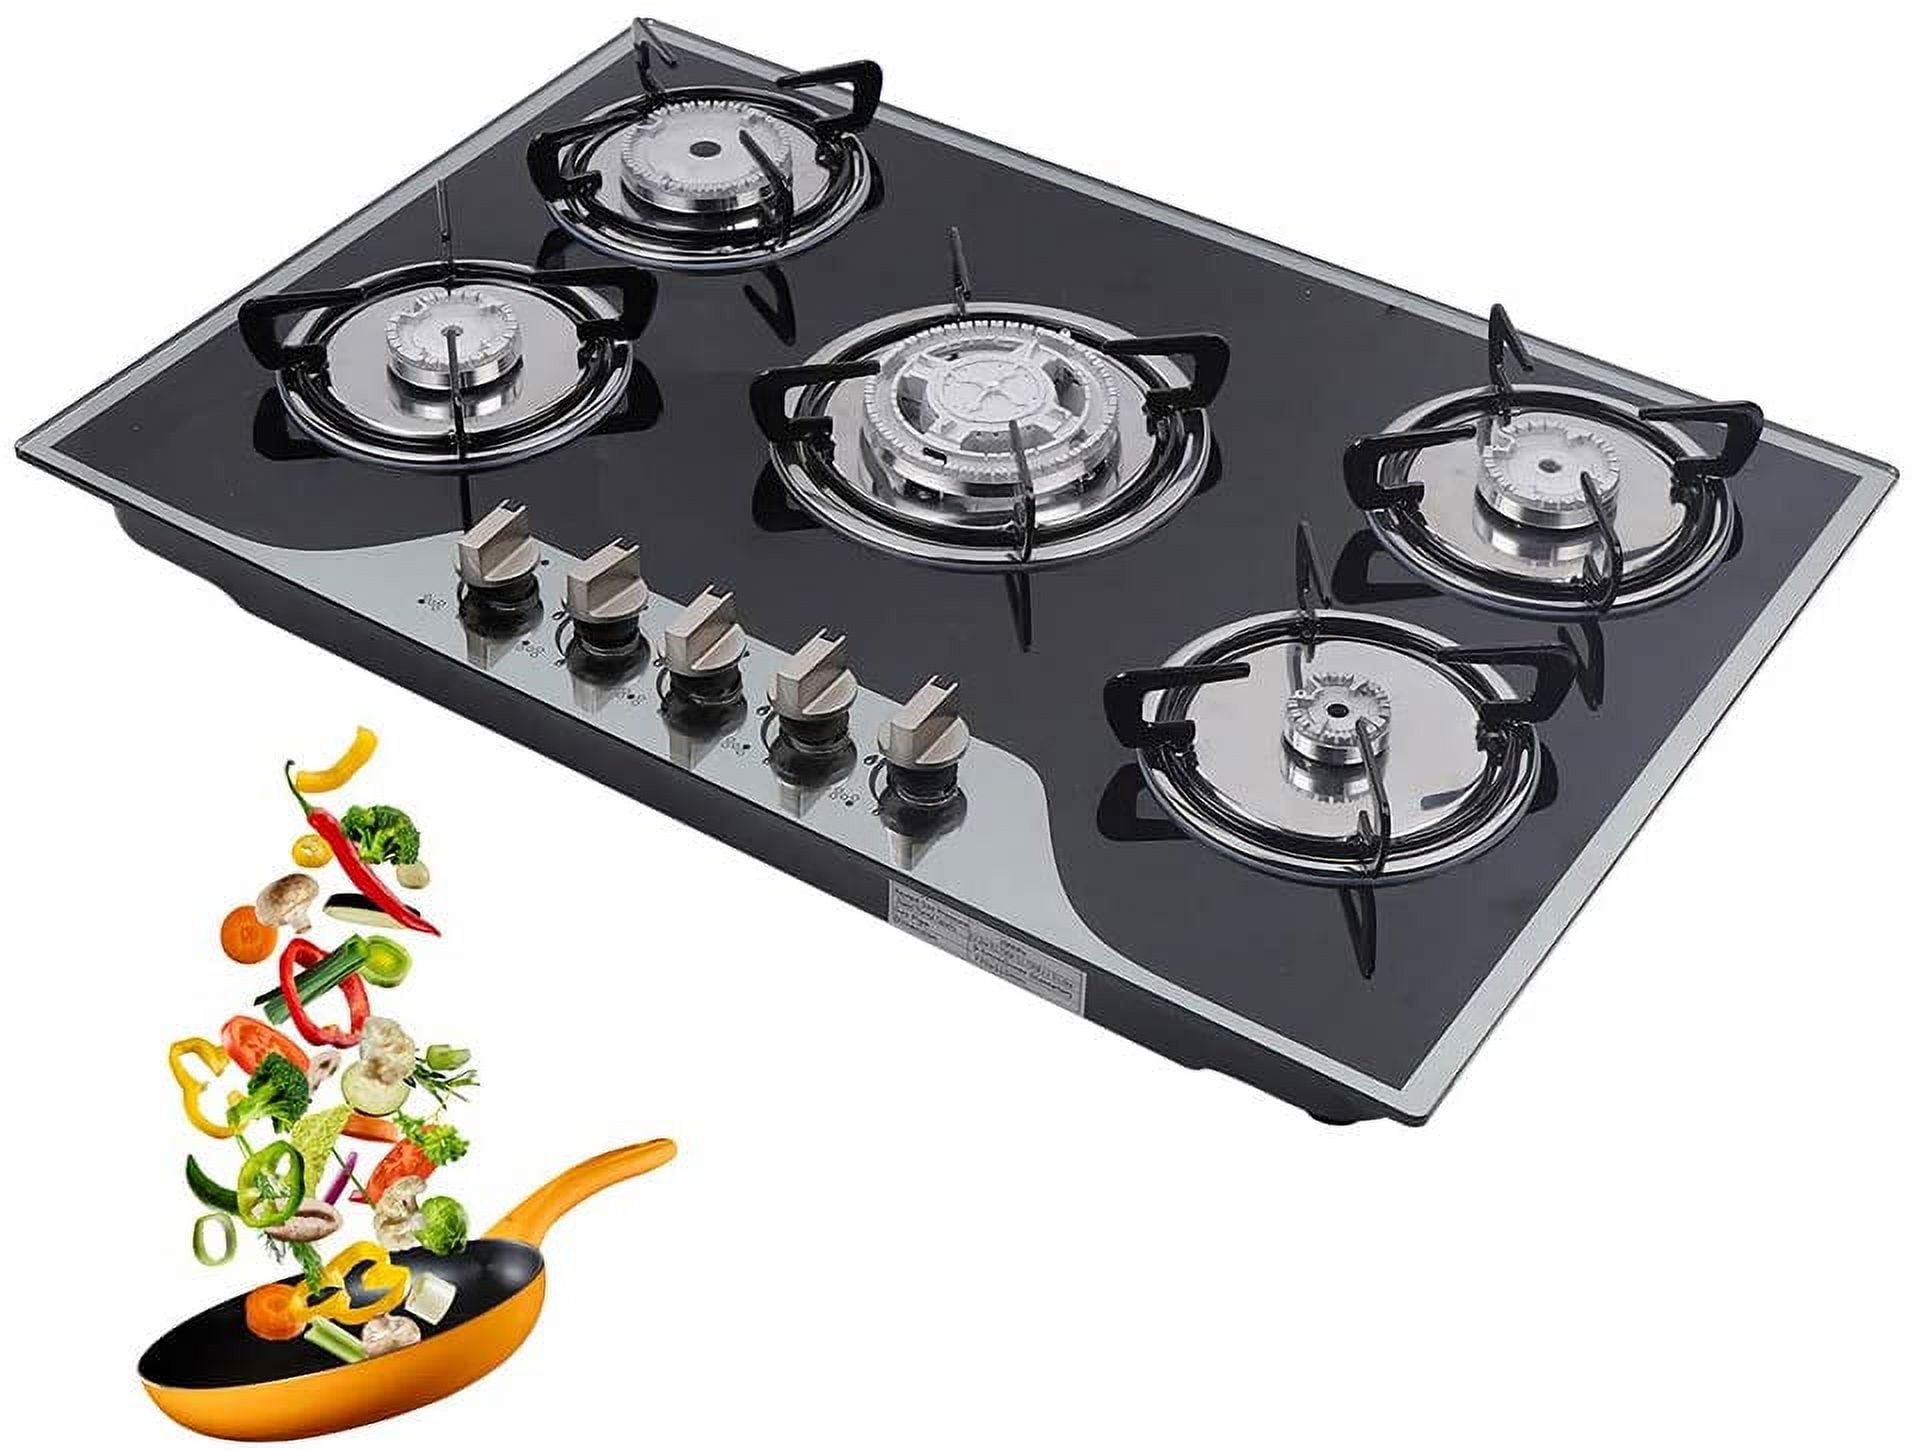 Gas hob Built-in Gas Cooktop,Table-Top Cooking, Cast Iron Portable Hob  Ring,NG/LPG Petroleum Gas Stove, for Kitchen Restaurant Apartments [Energy